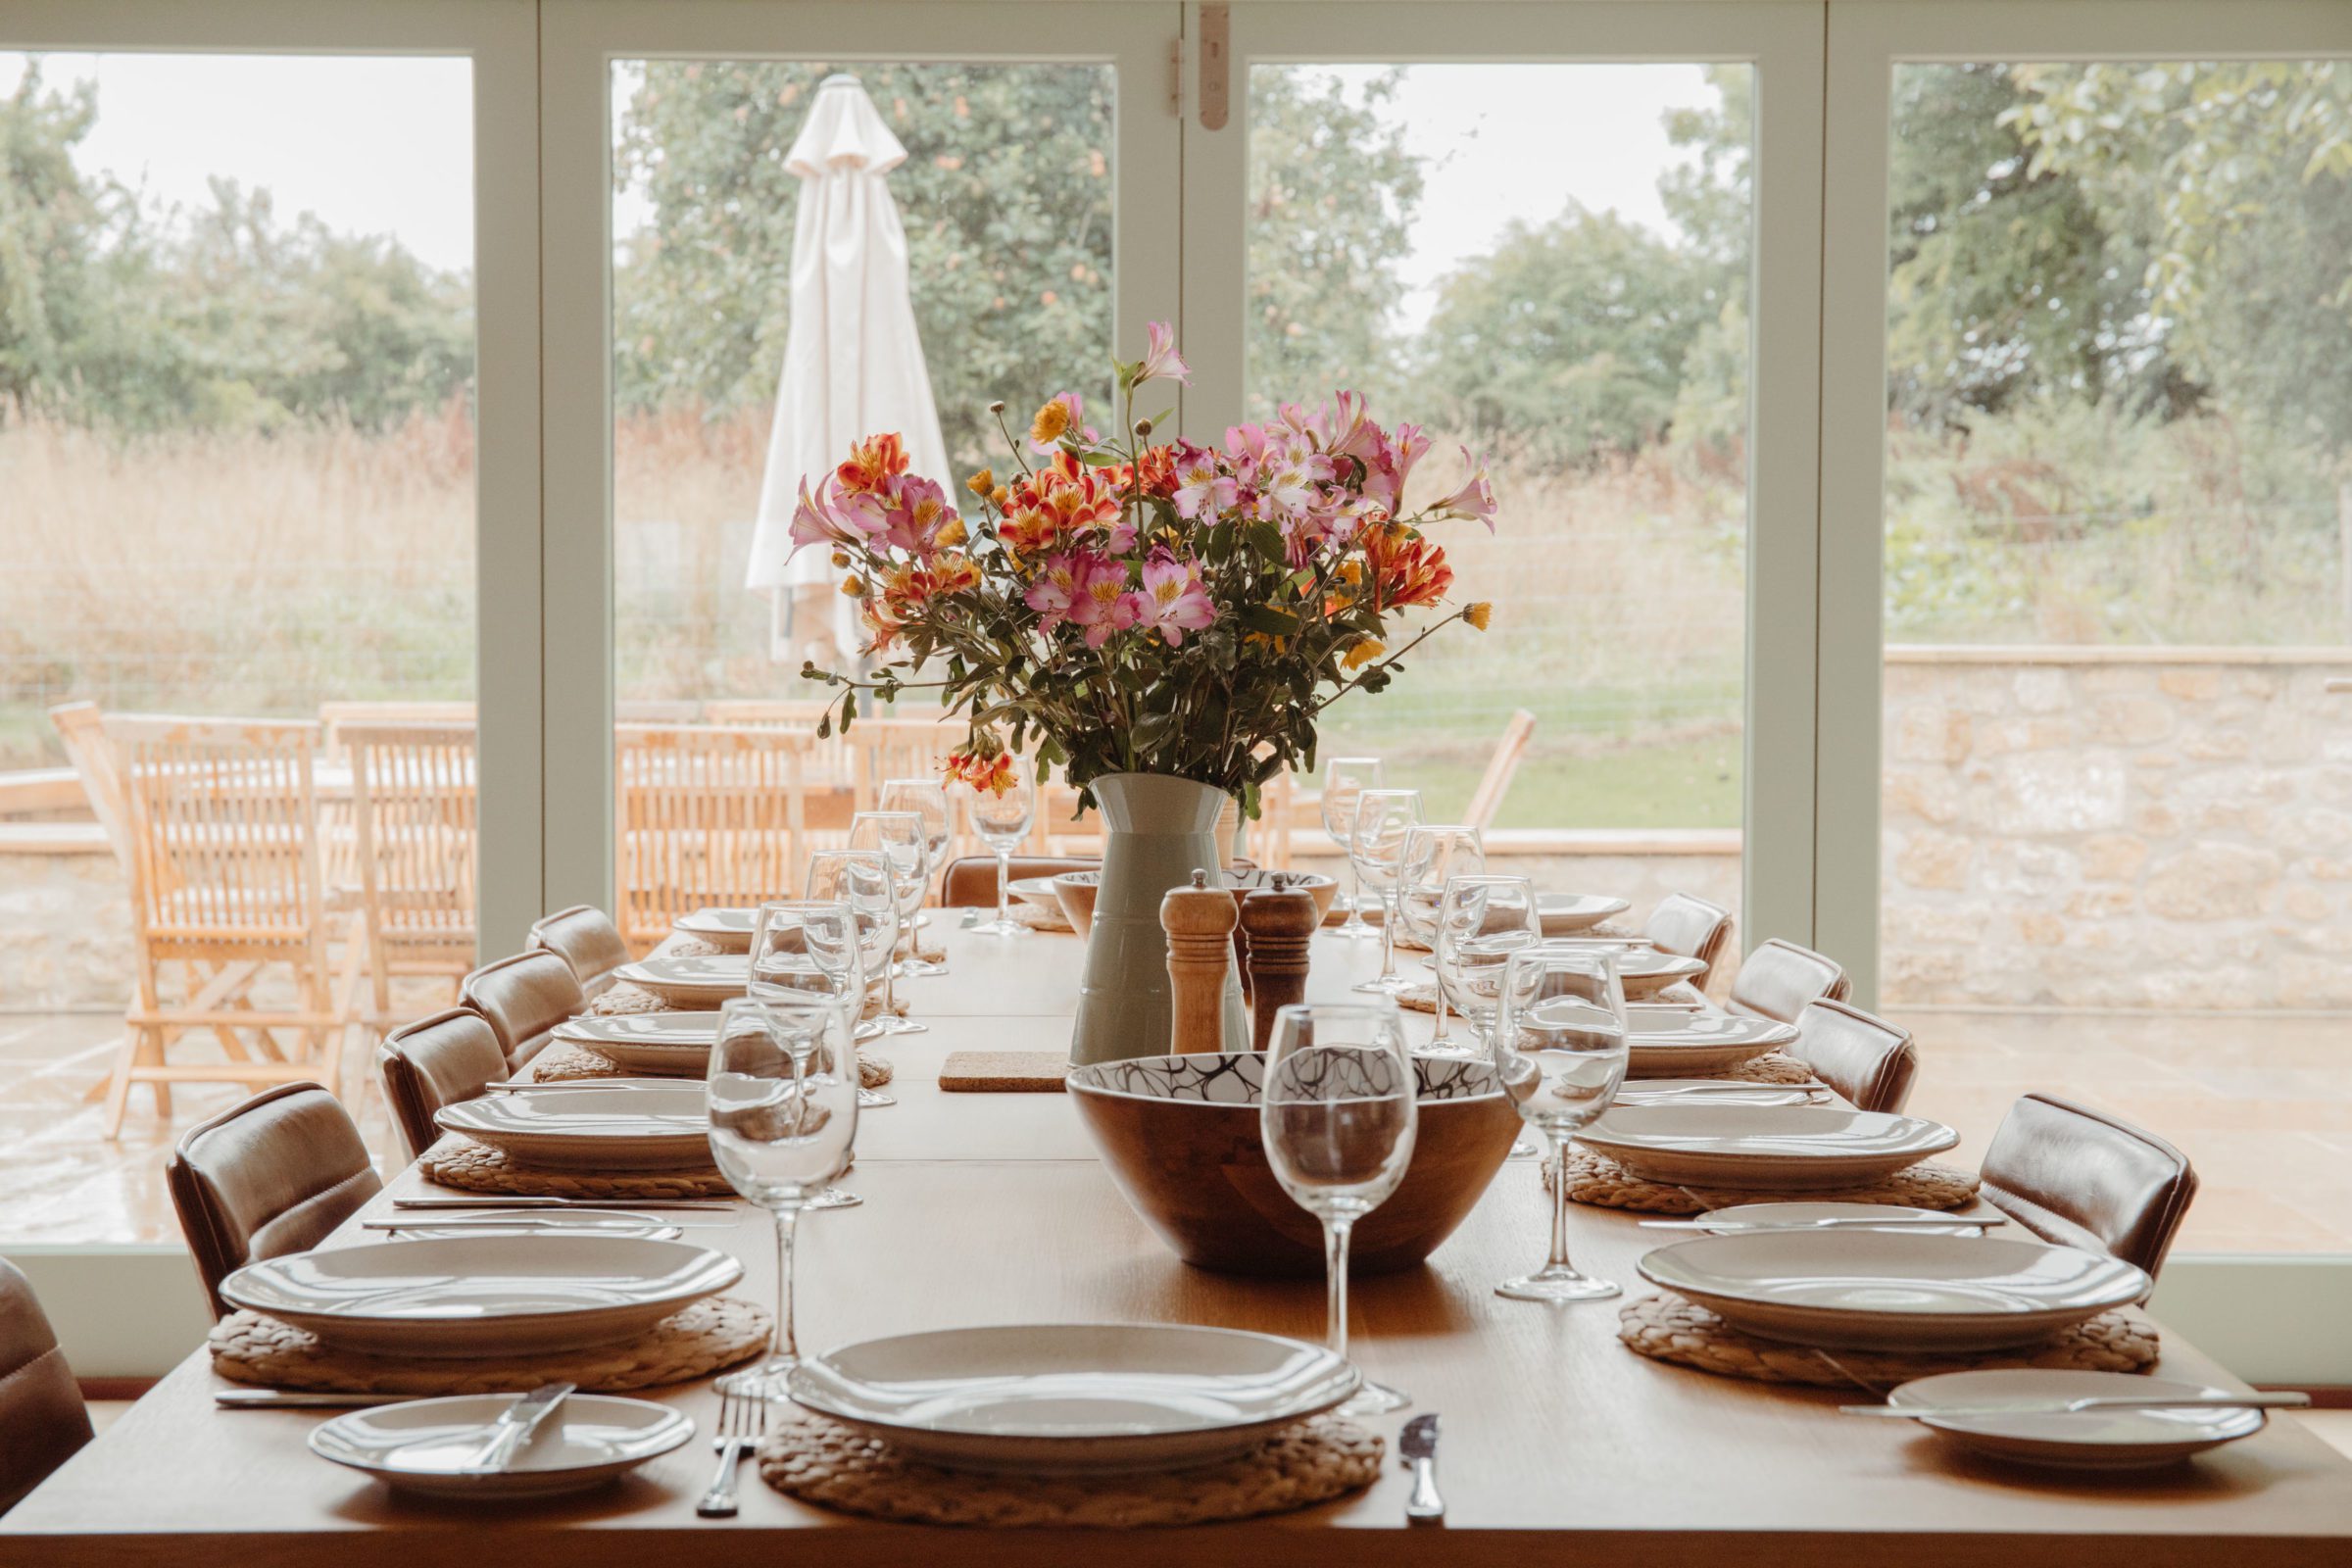 Dining table laid with plates, wine glasses and wild flowers